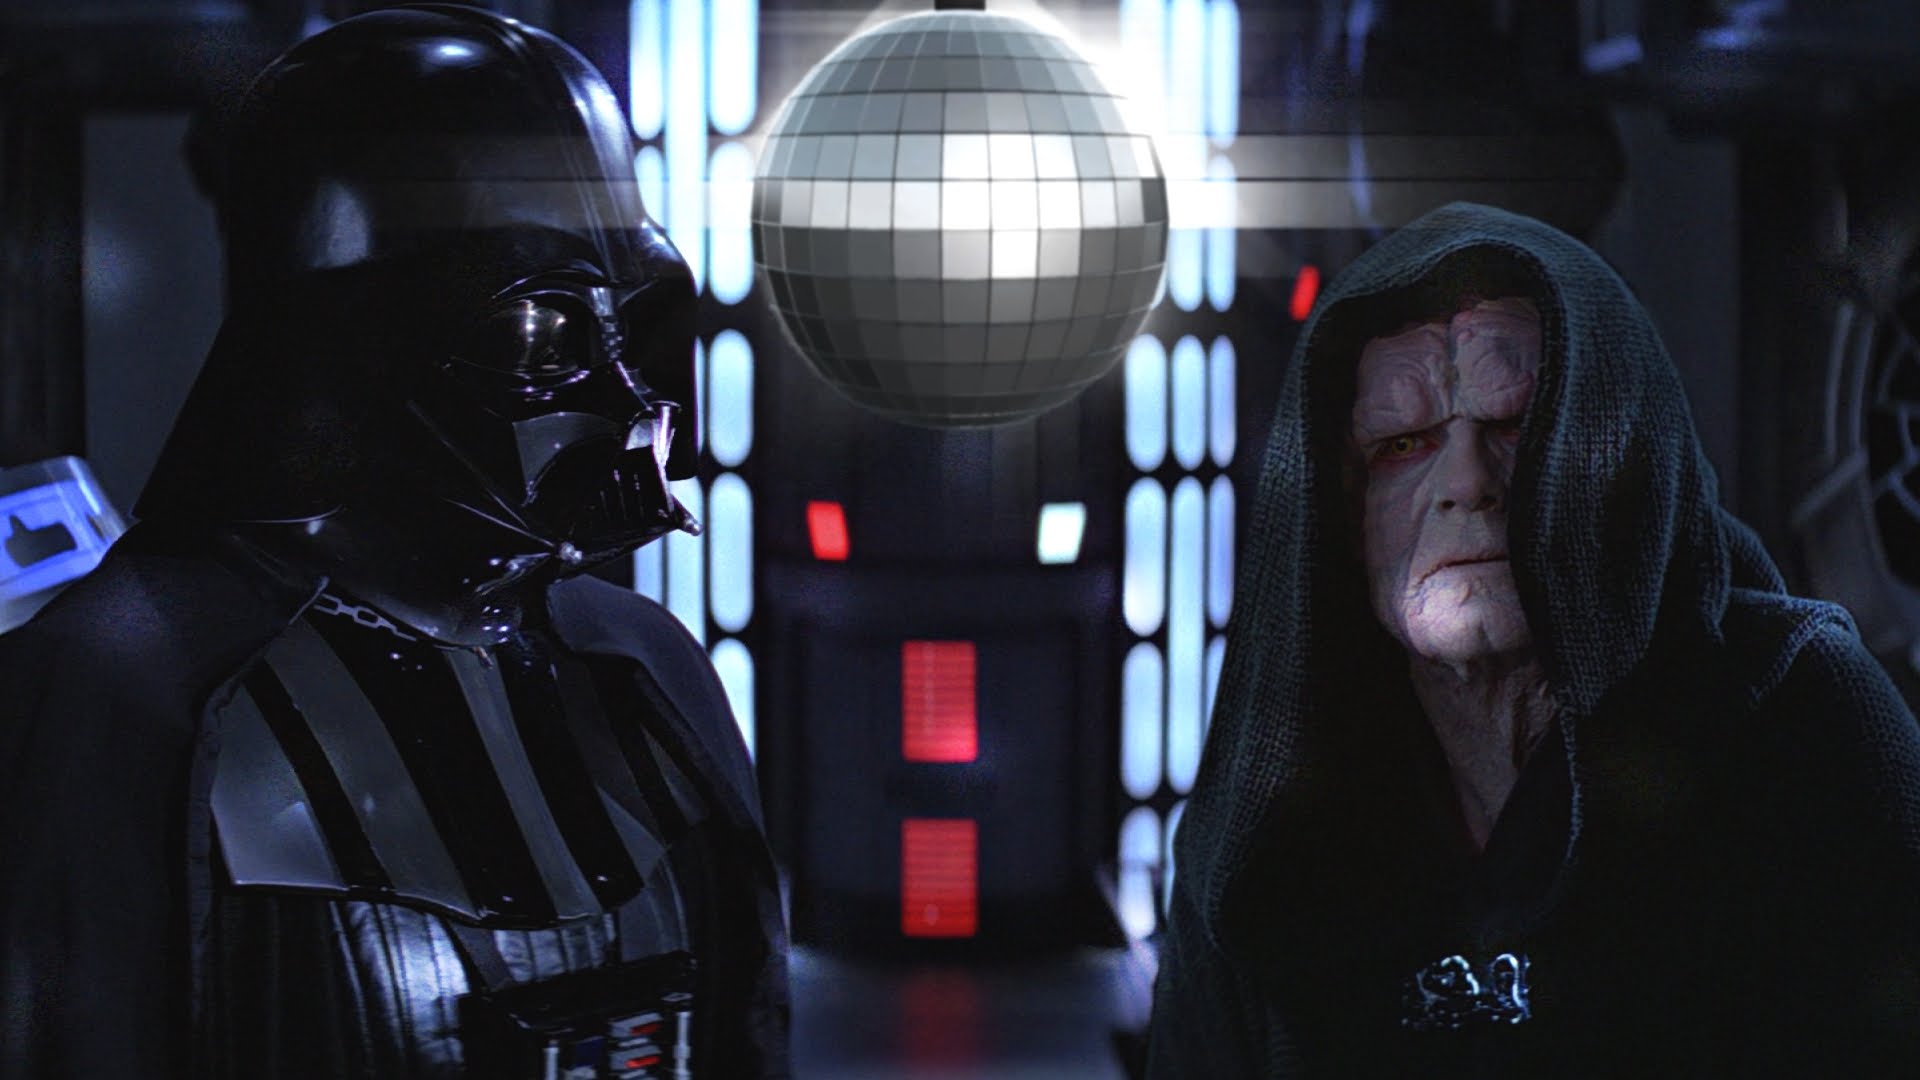 This is exactly what Darth Vader and Emperor Palpatine look like while chil...